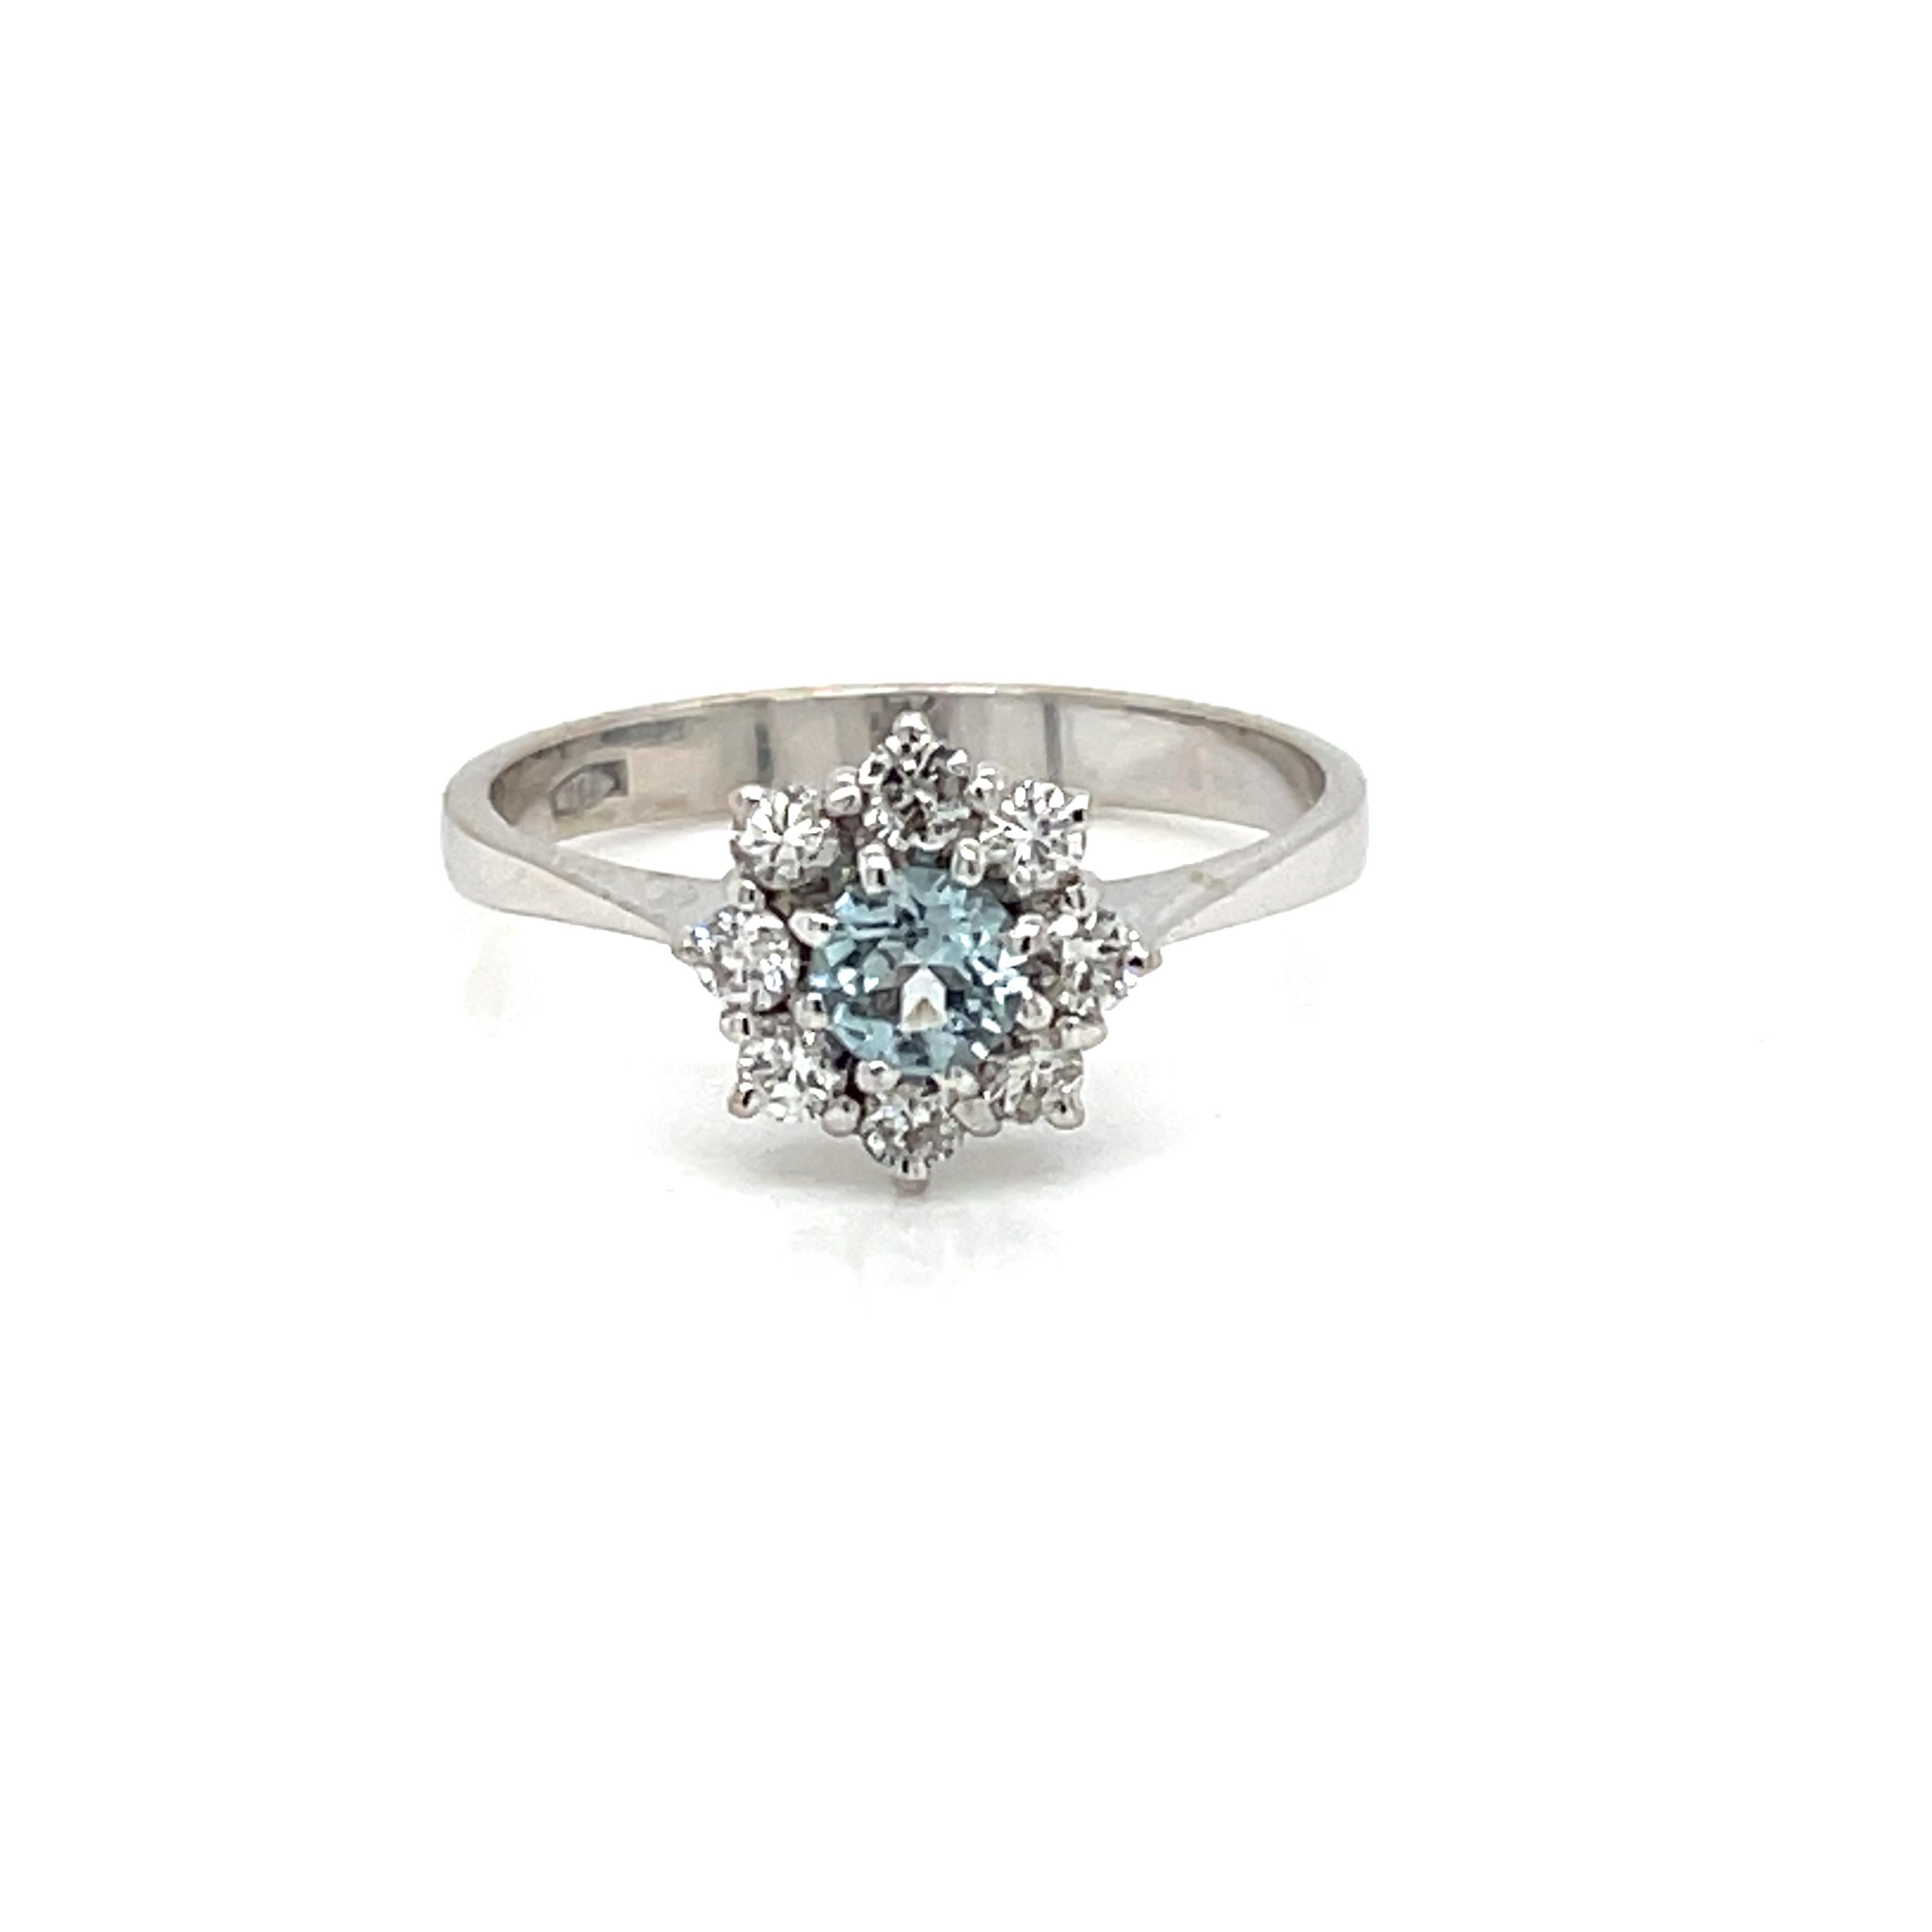 Delightful 18 kt gold ring with a vivid round aquamarine in the center of approximately 0.30 ct and a halo of excellent quality brilliant-cut diamonds - total weight approximately 0.32 ct

CONDITION: Pre-owned - Excellent
METAL: 18k Gold
GEMSTONE: